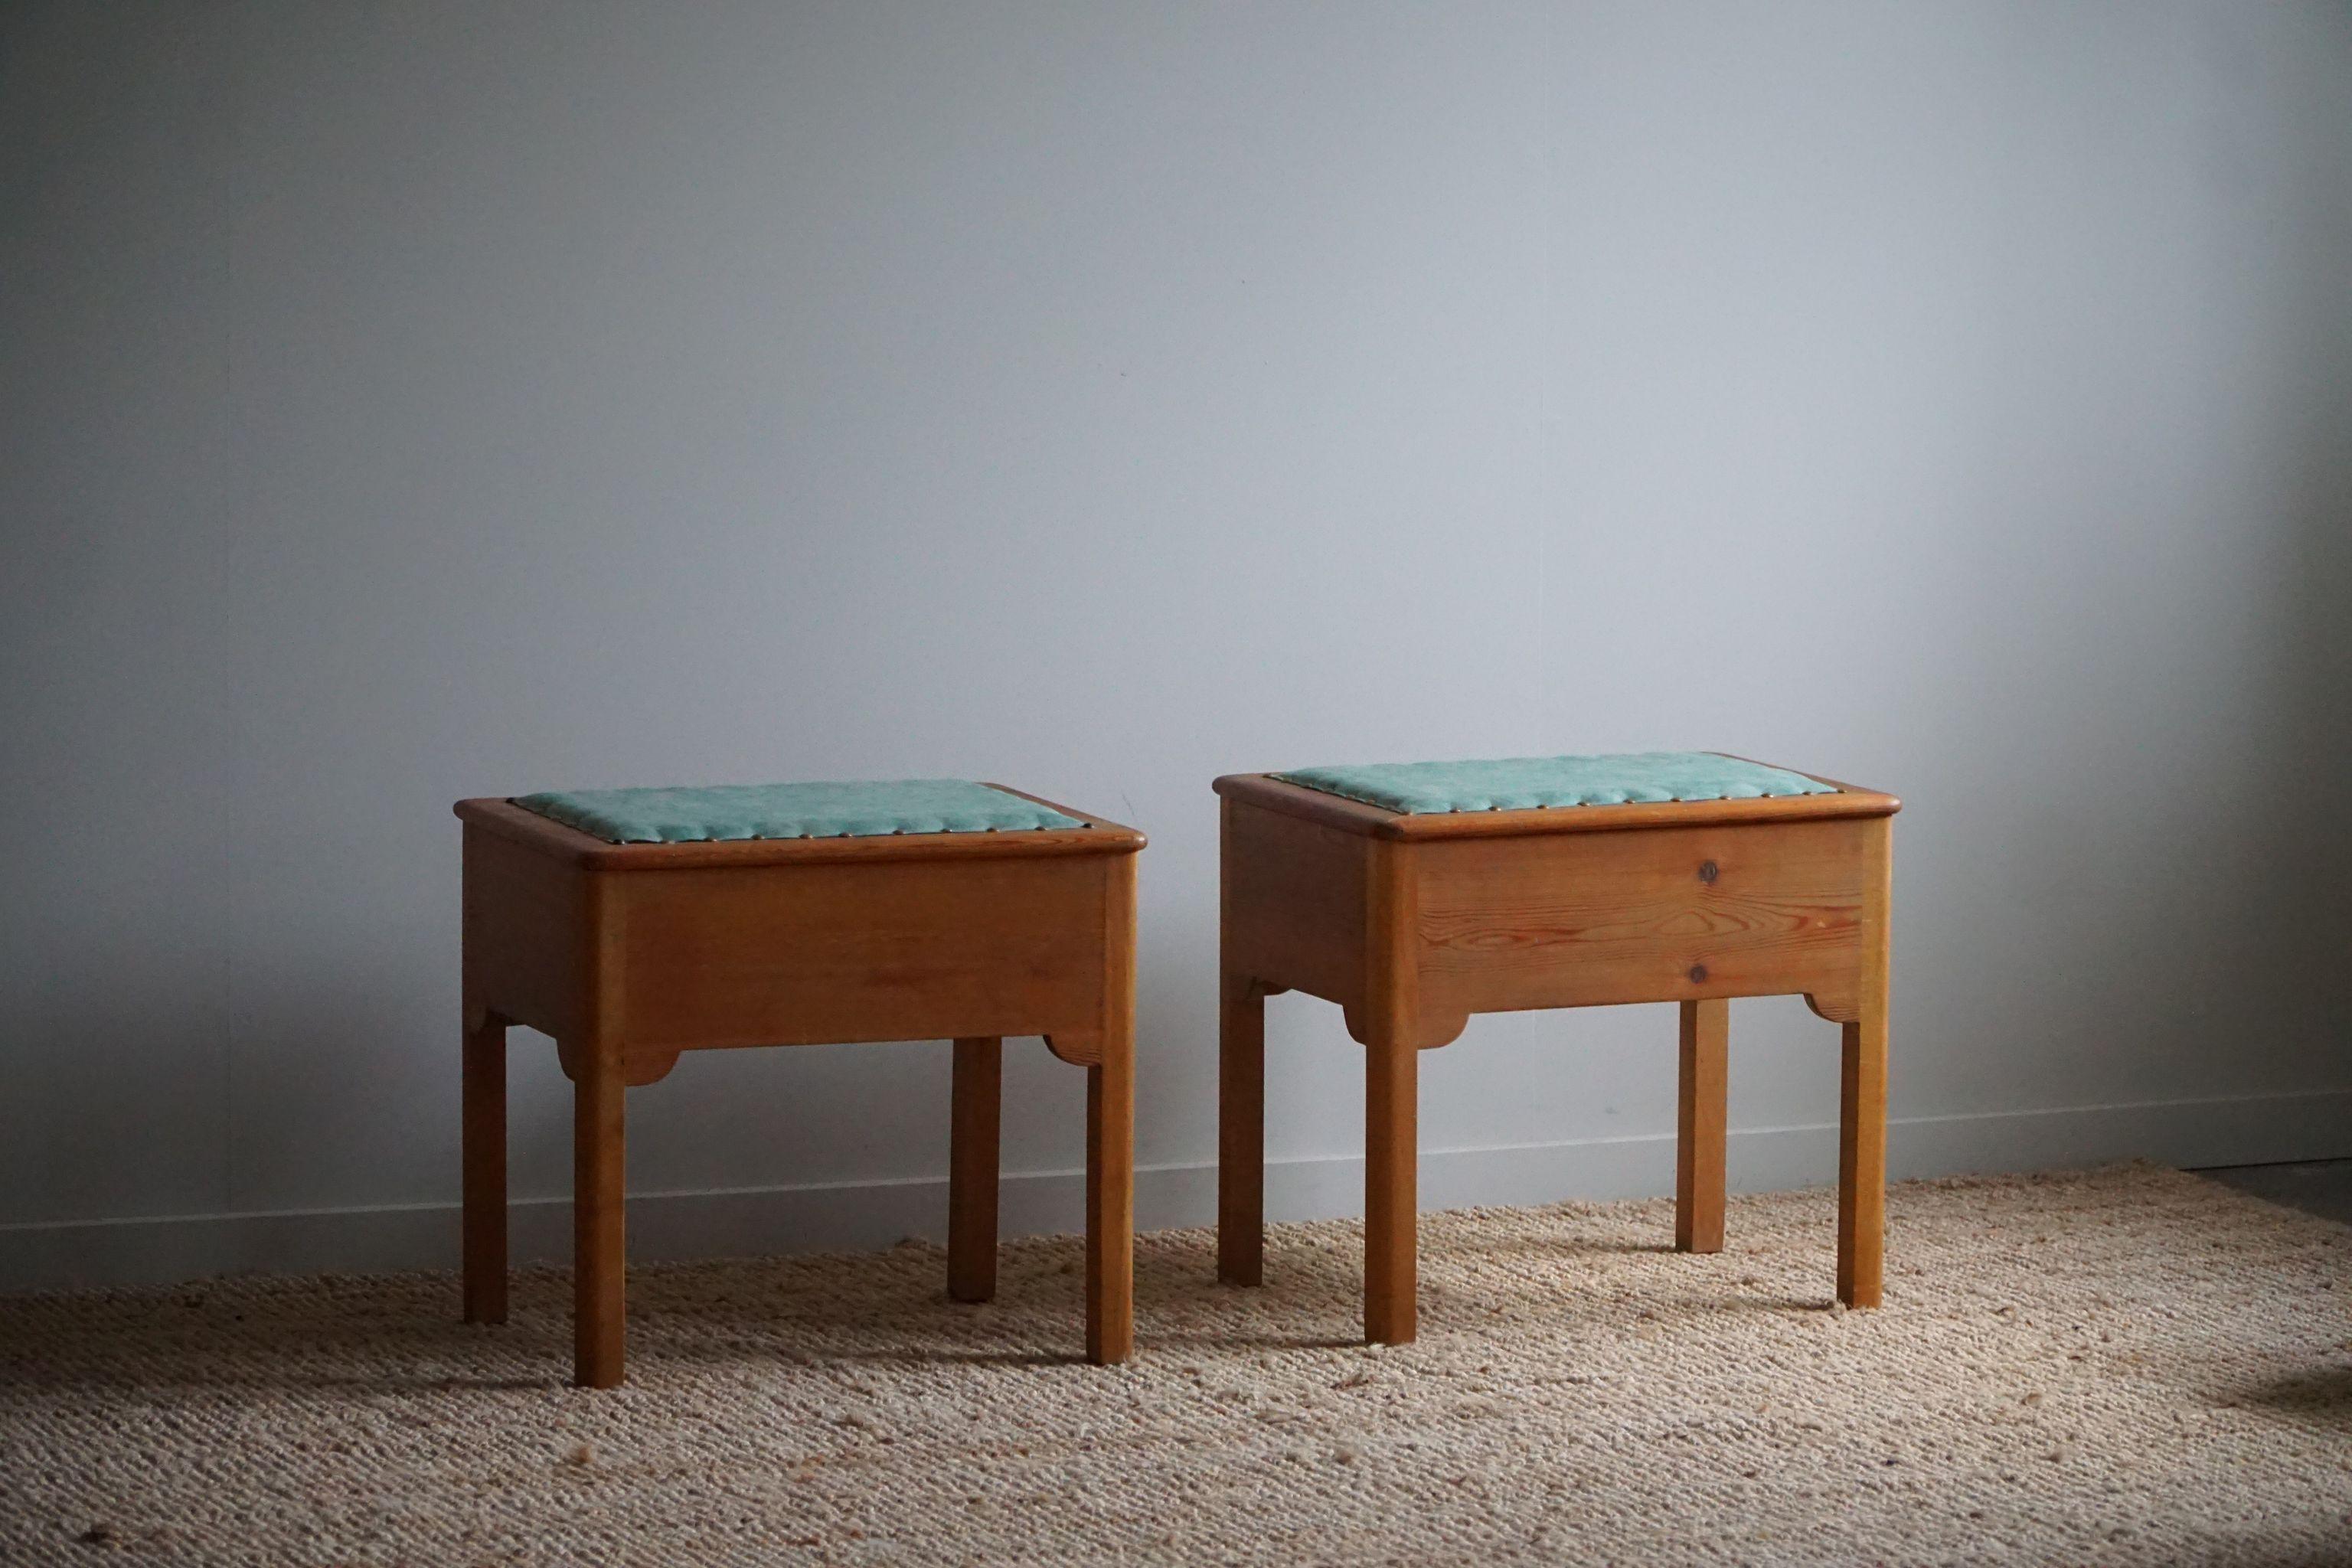 20th Century A Pair of Stools in Pine & Fabric with Storage, By a Swedish Cabinetmaker, 1950s For Sale